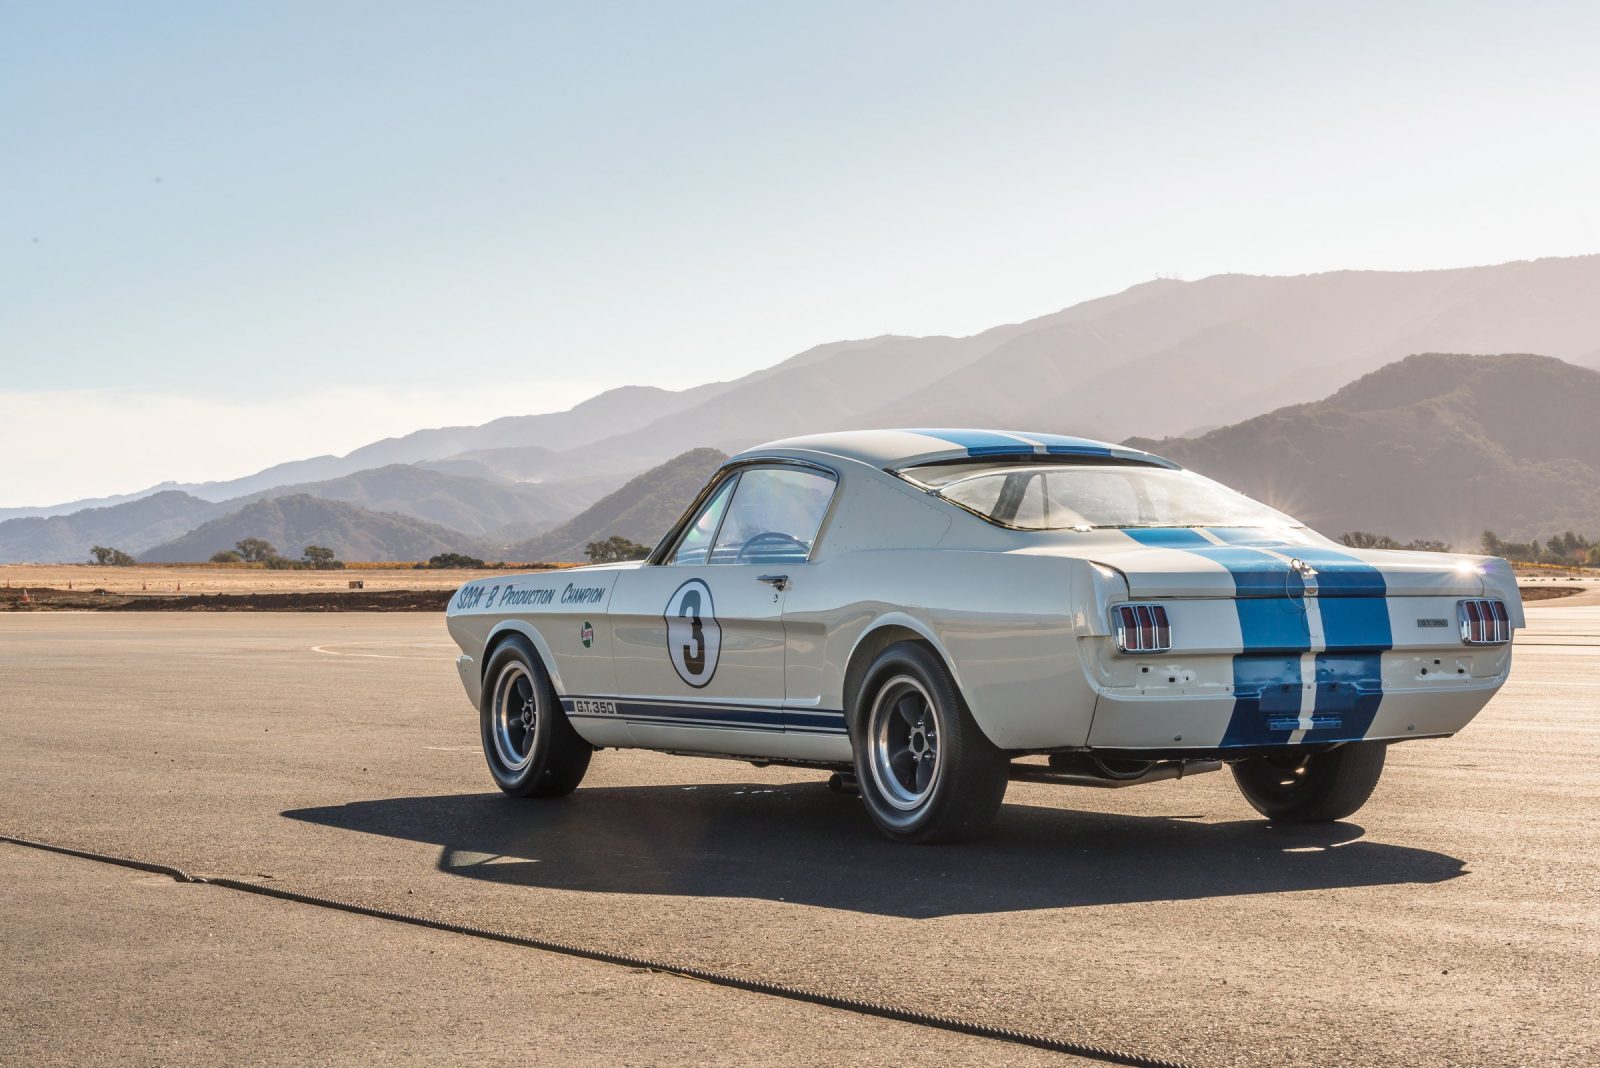 shelby-mustang-gt350-r-car-12-1600x1068.